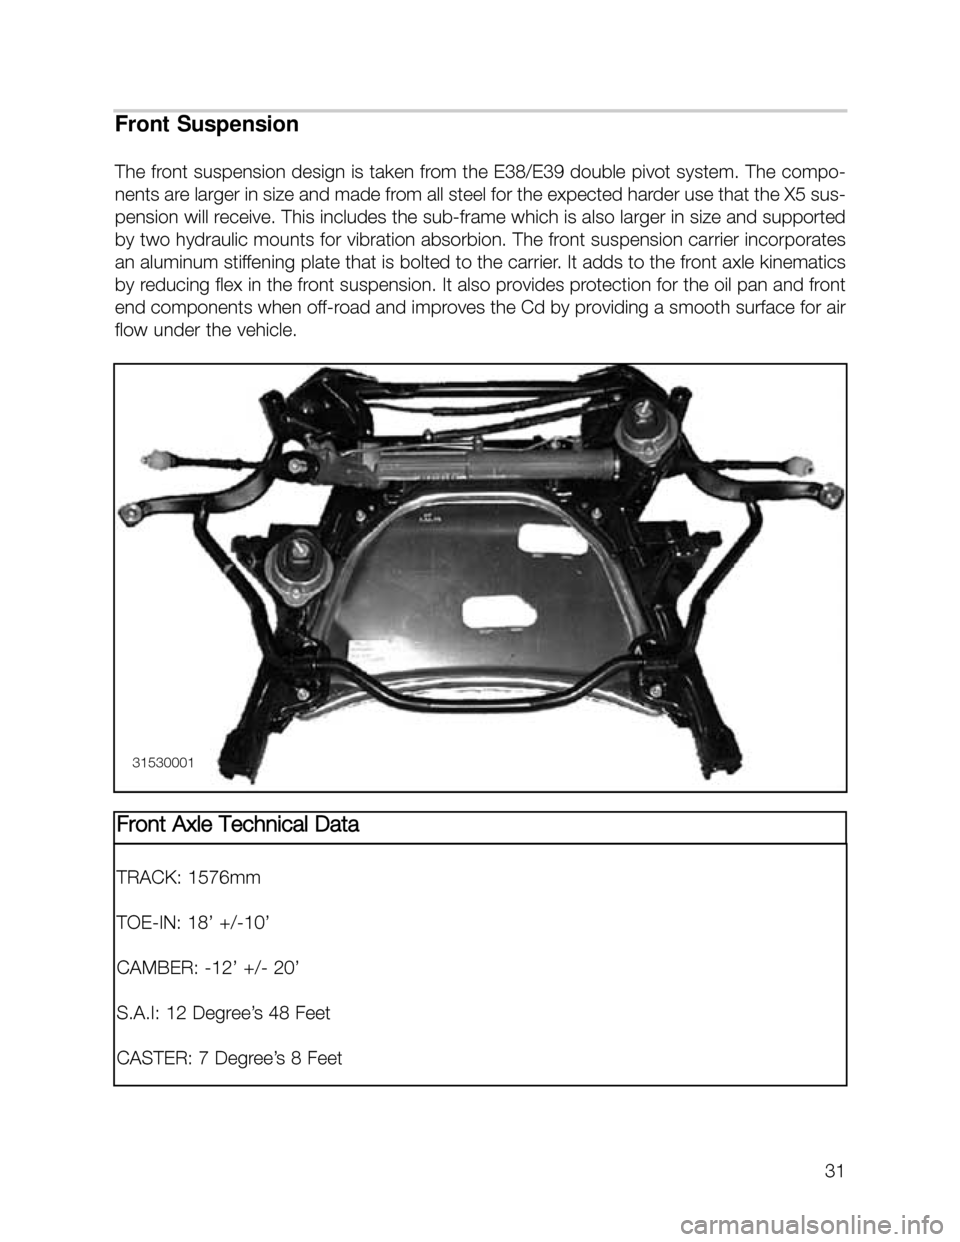 BMW X5 2003 E53 Owners Guide 31
Front Suspension
The front suspension design is taken from the E38/E39 double pivot system. The compo-
nents are larger in size and made from all steel for the expected harder use that the X5 sus-
